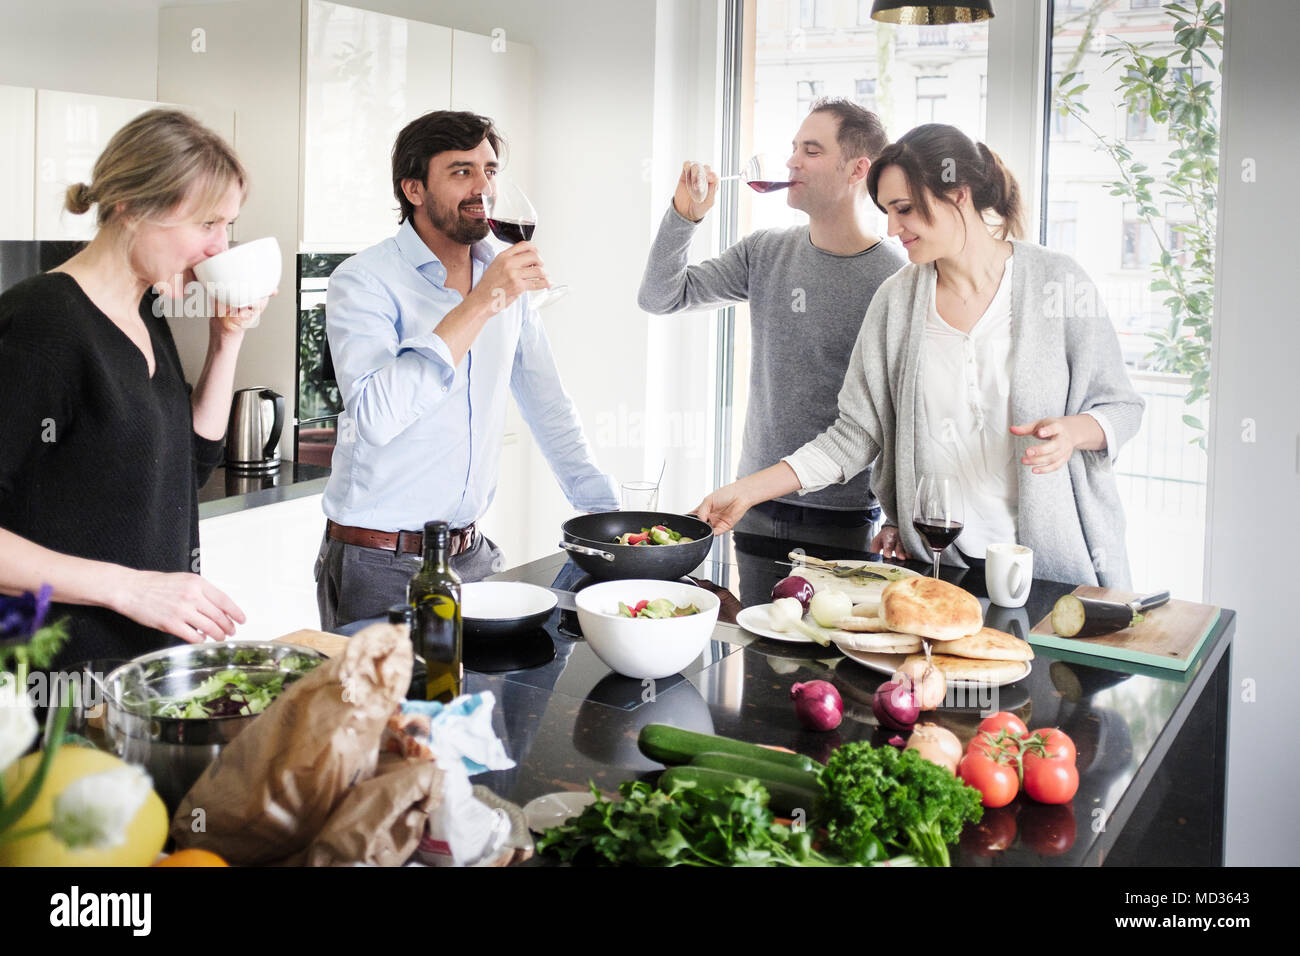 Group of friends  cooking together while casuallyhaving a drink and  snacking on a selection of vegetarian  food. Laughing and enjoying themselves. Stock Photo